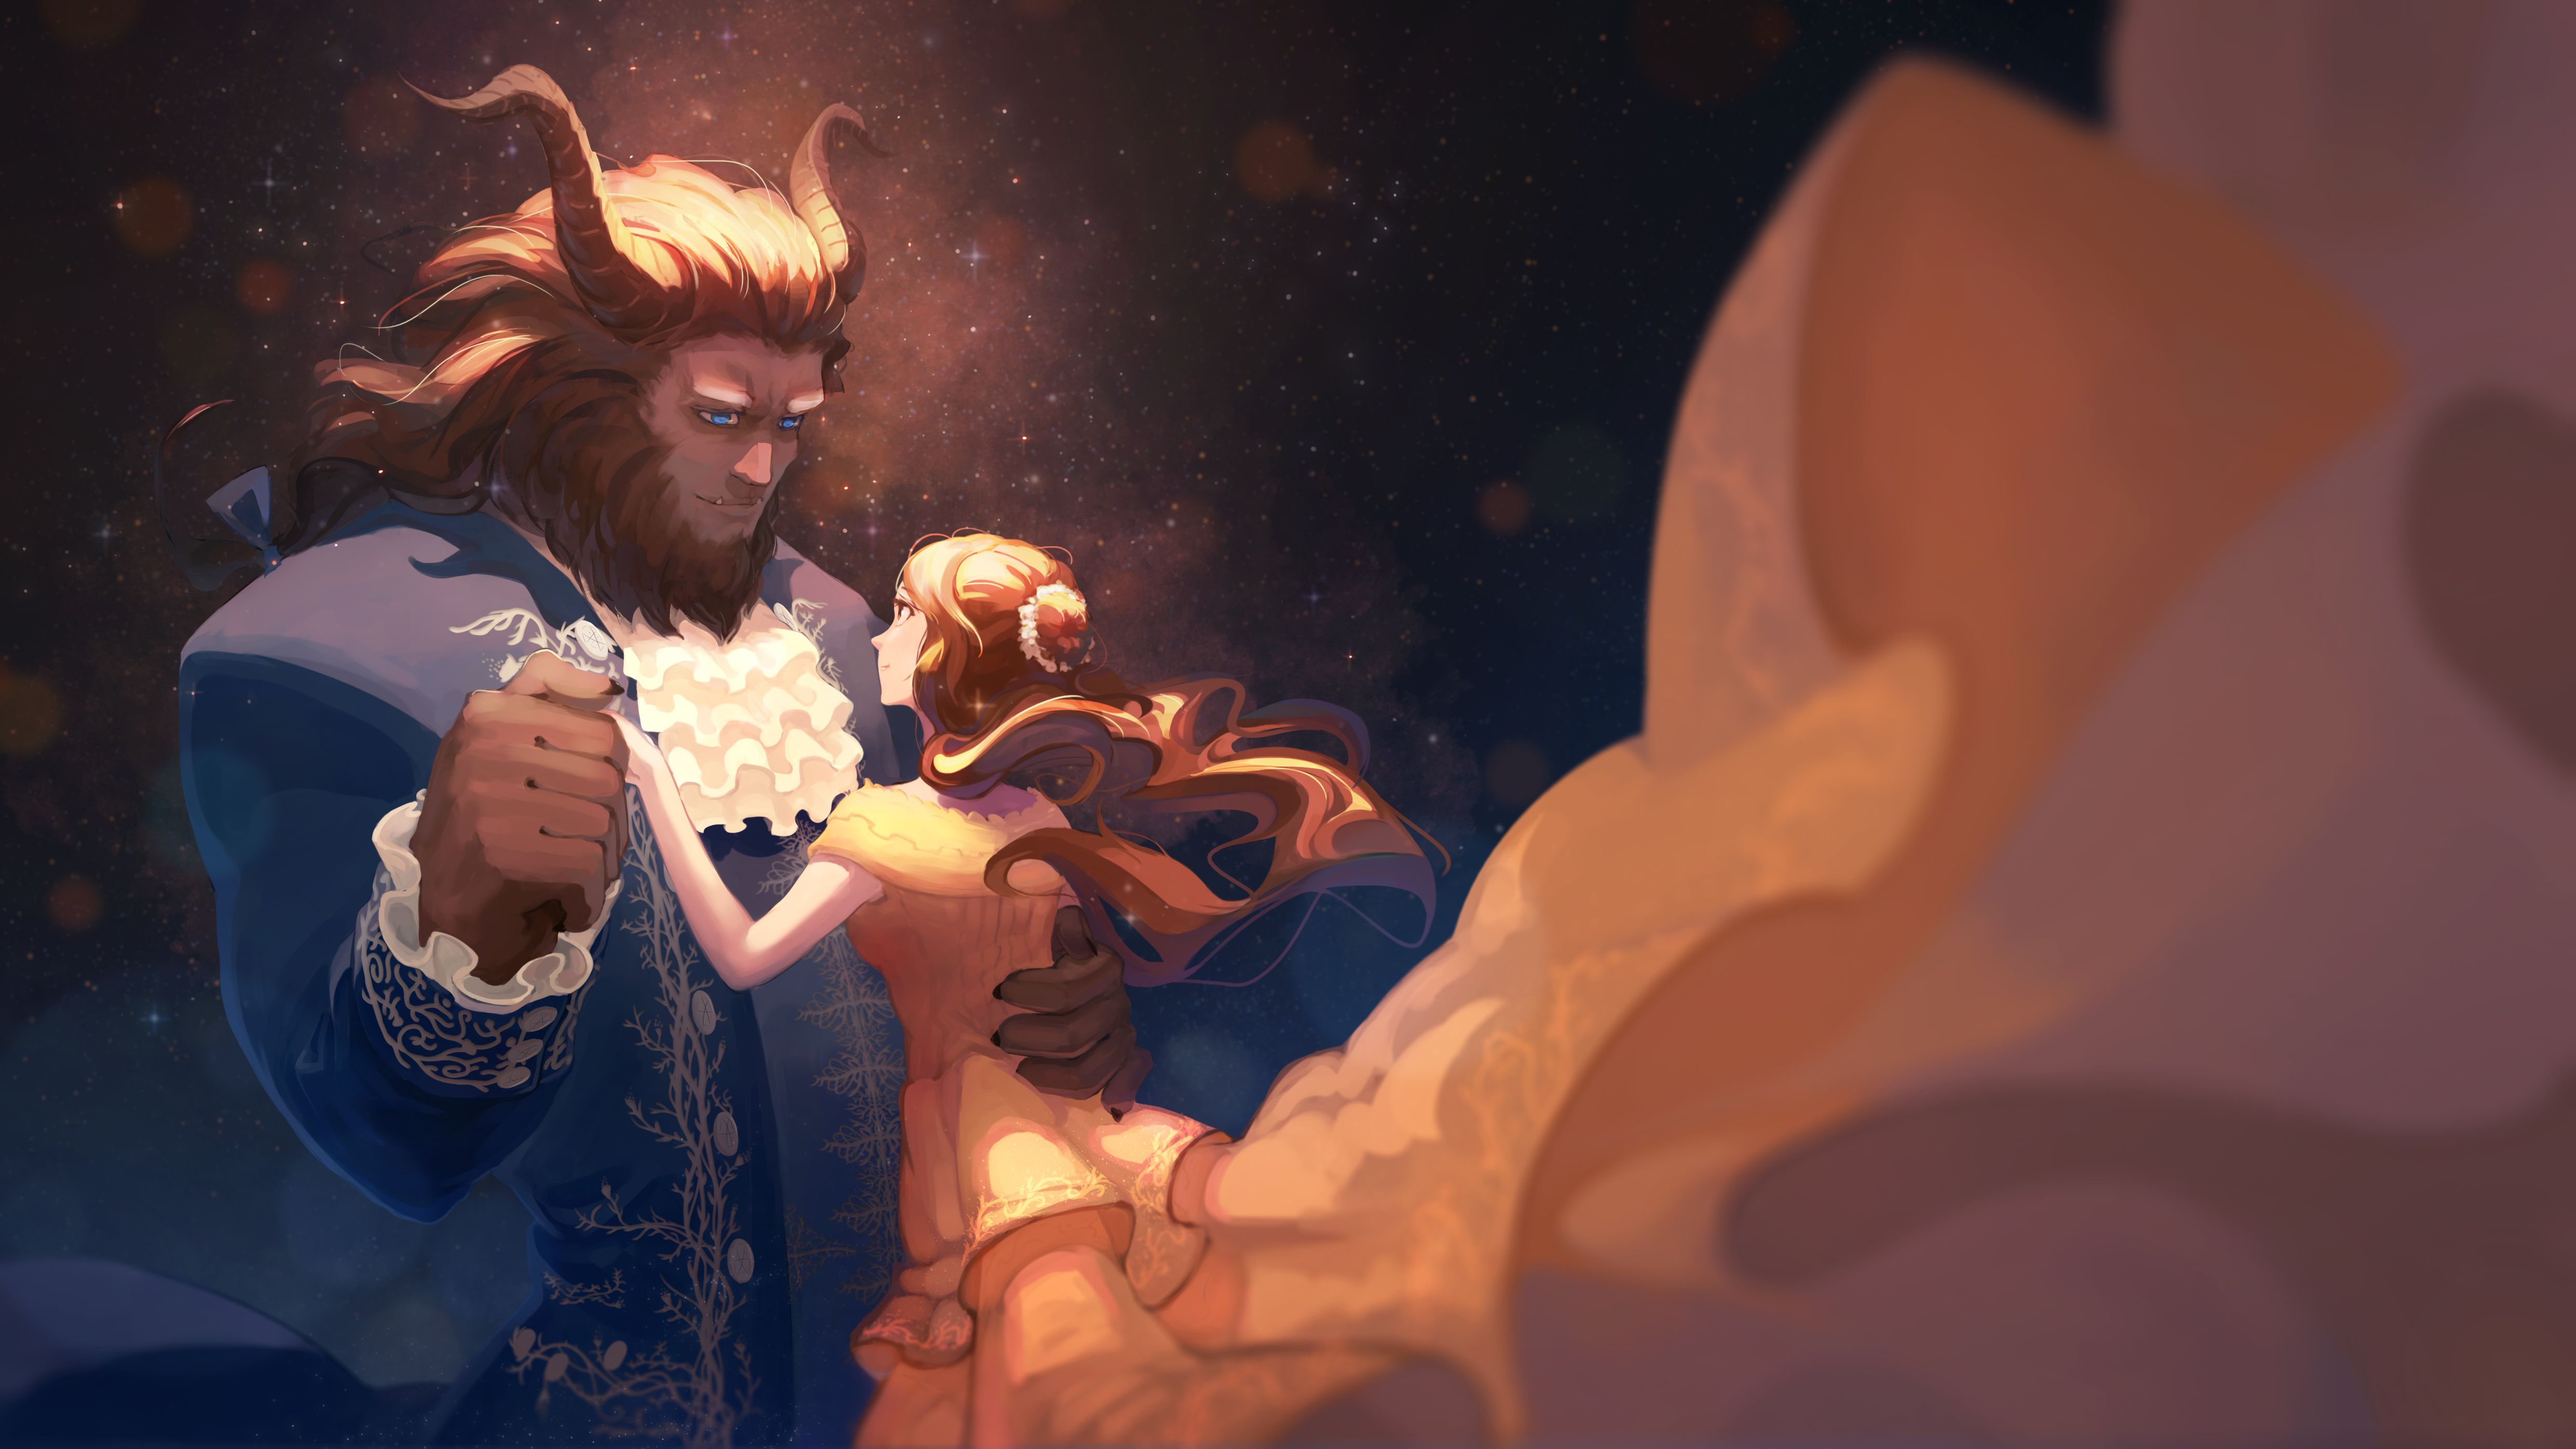 Beauty and the Beast (Disney) Wallpaper Anime